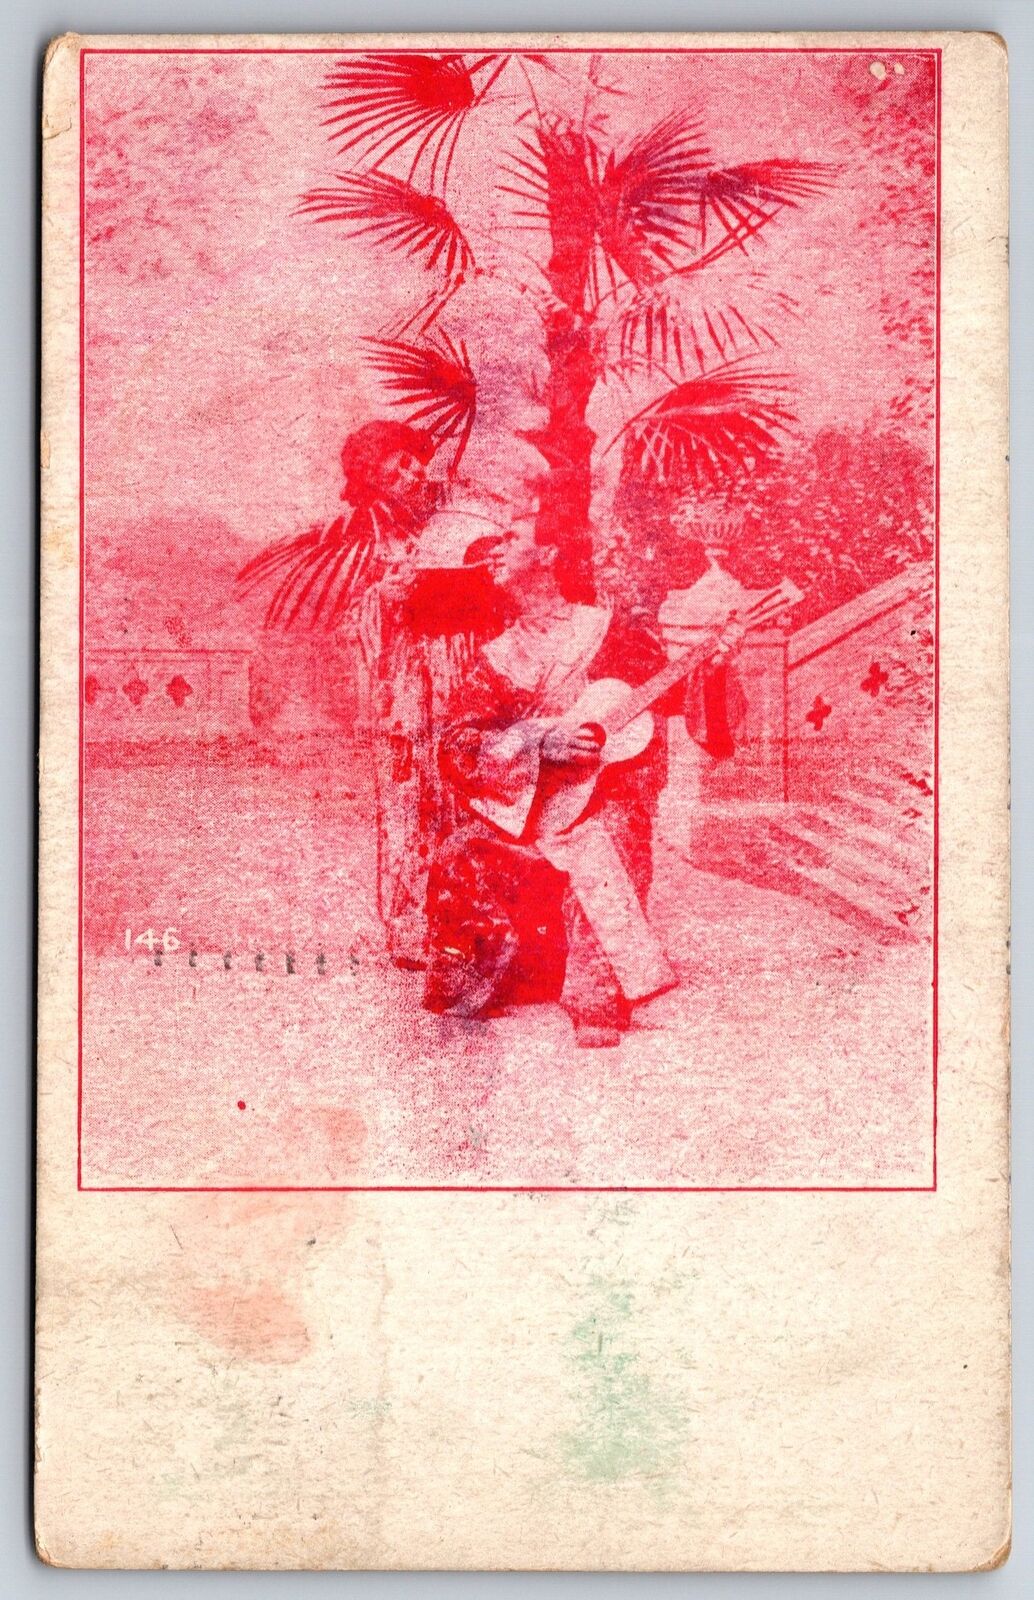 Man Plays Guitar While Wife Sings A Serenading Song~Red Tint 1911 Postcard